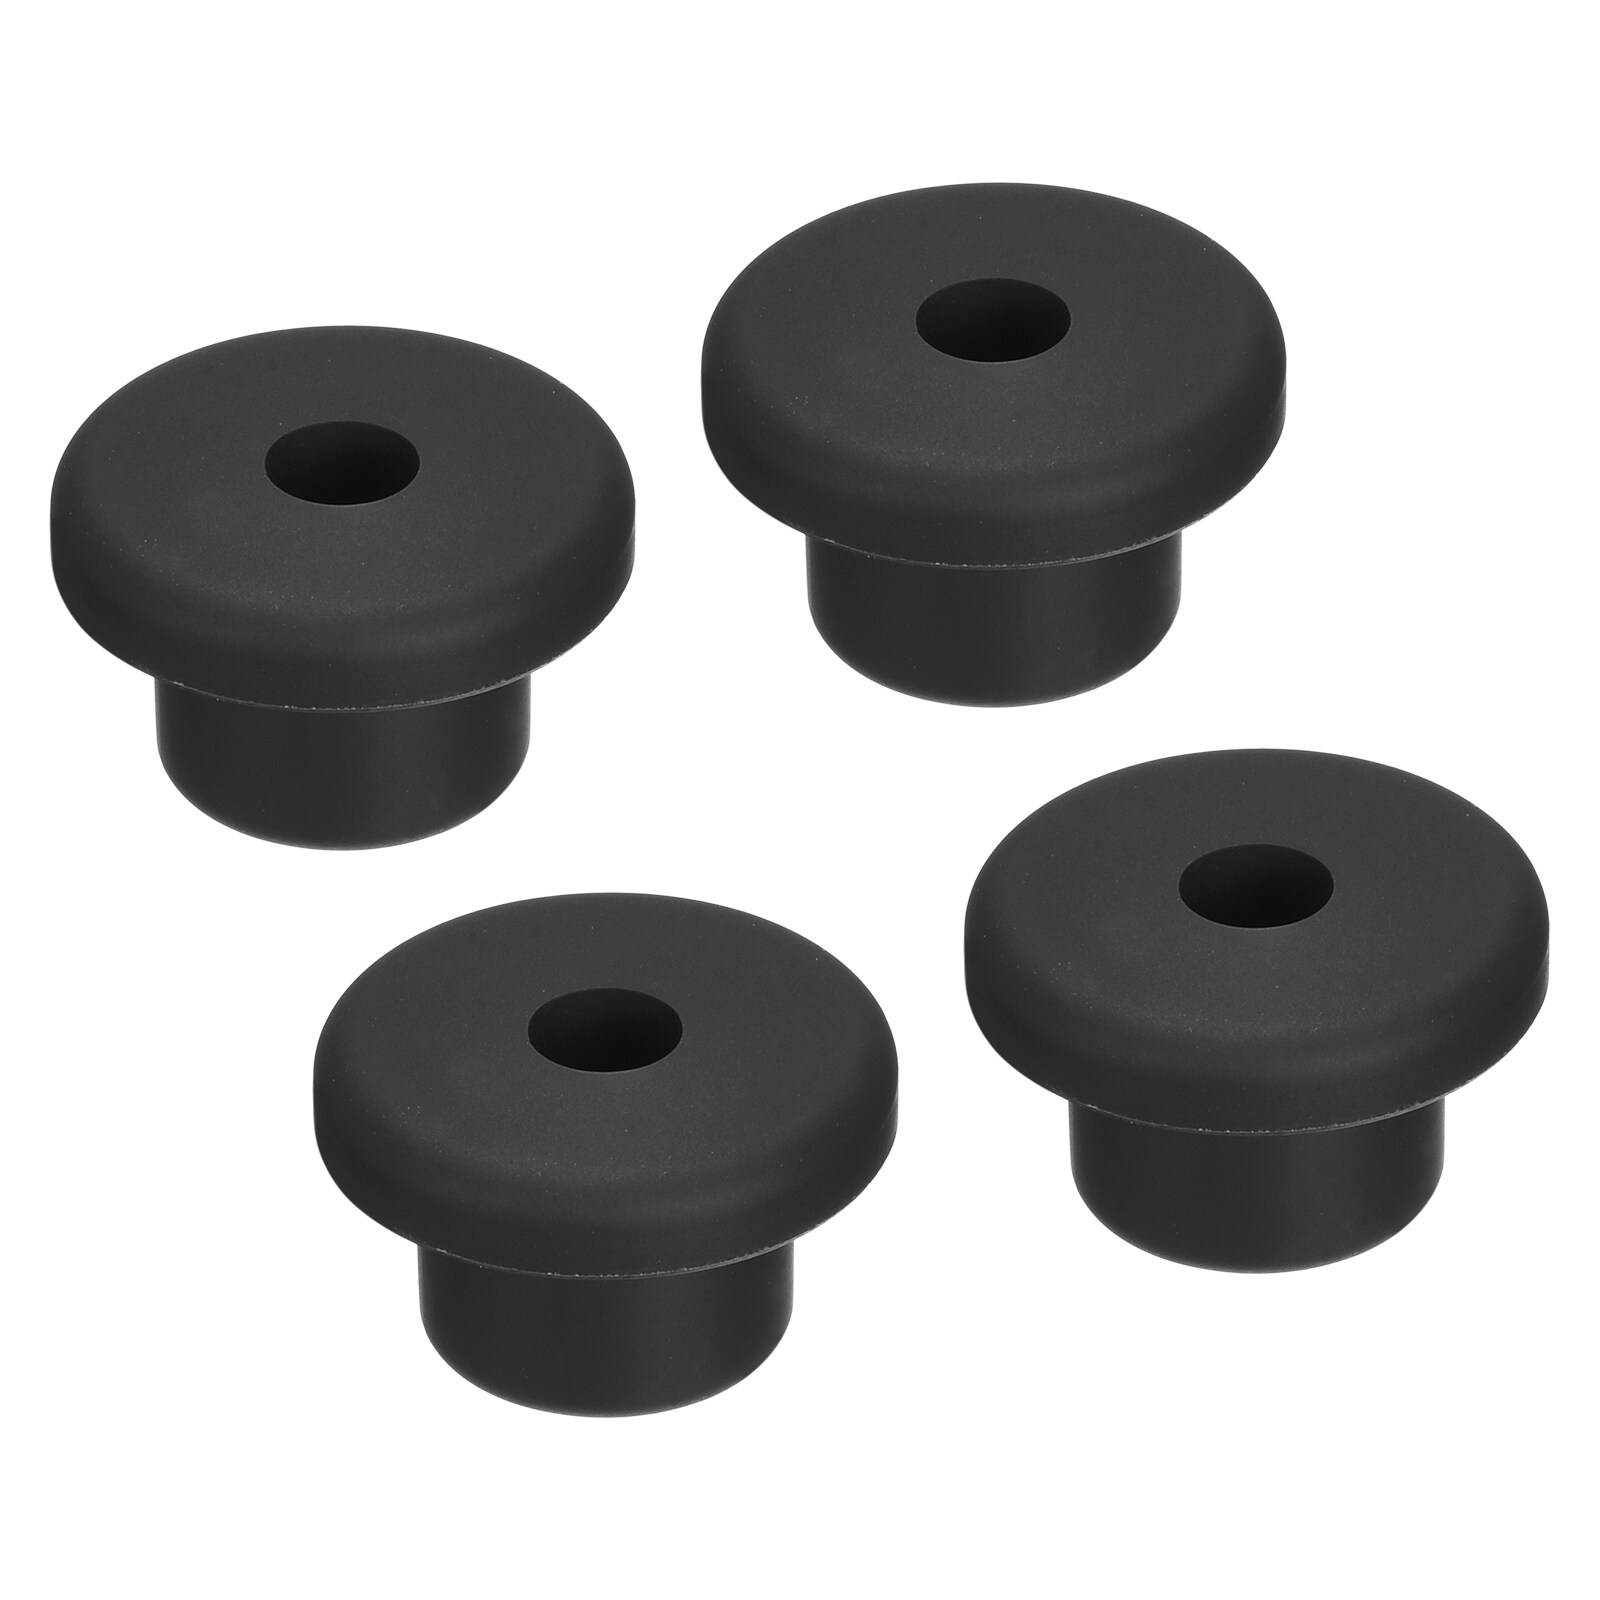 Self Adhesive Magnetic Dia 15-40mm Thickness: 1-2mm Round Rubber